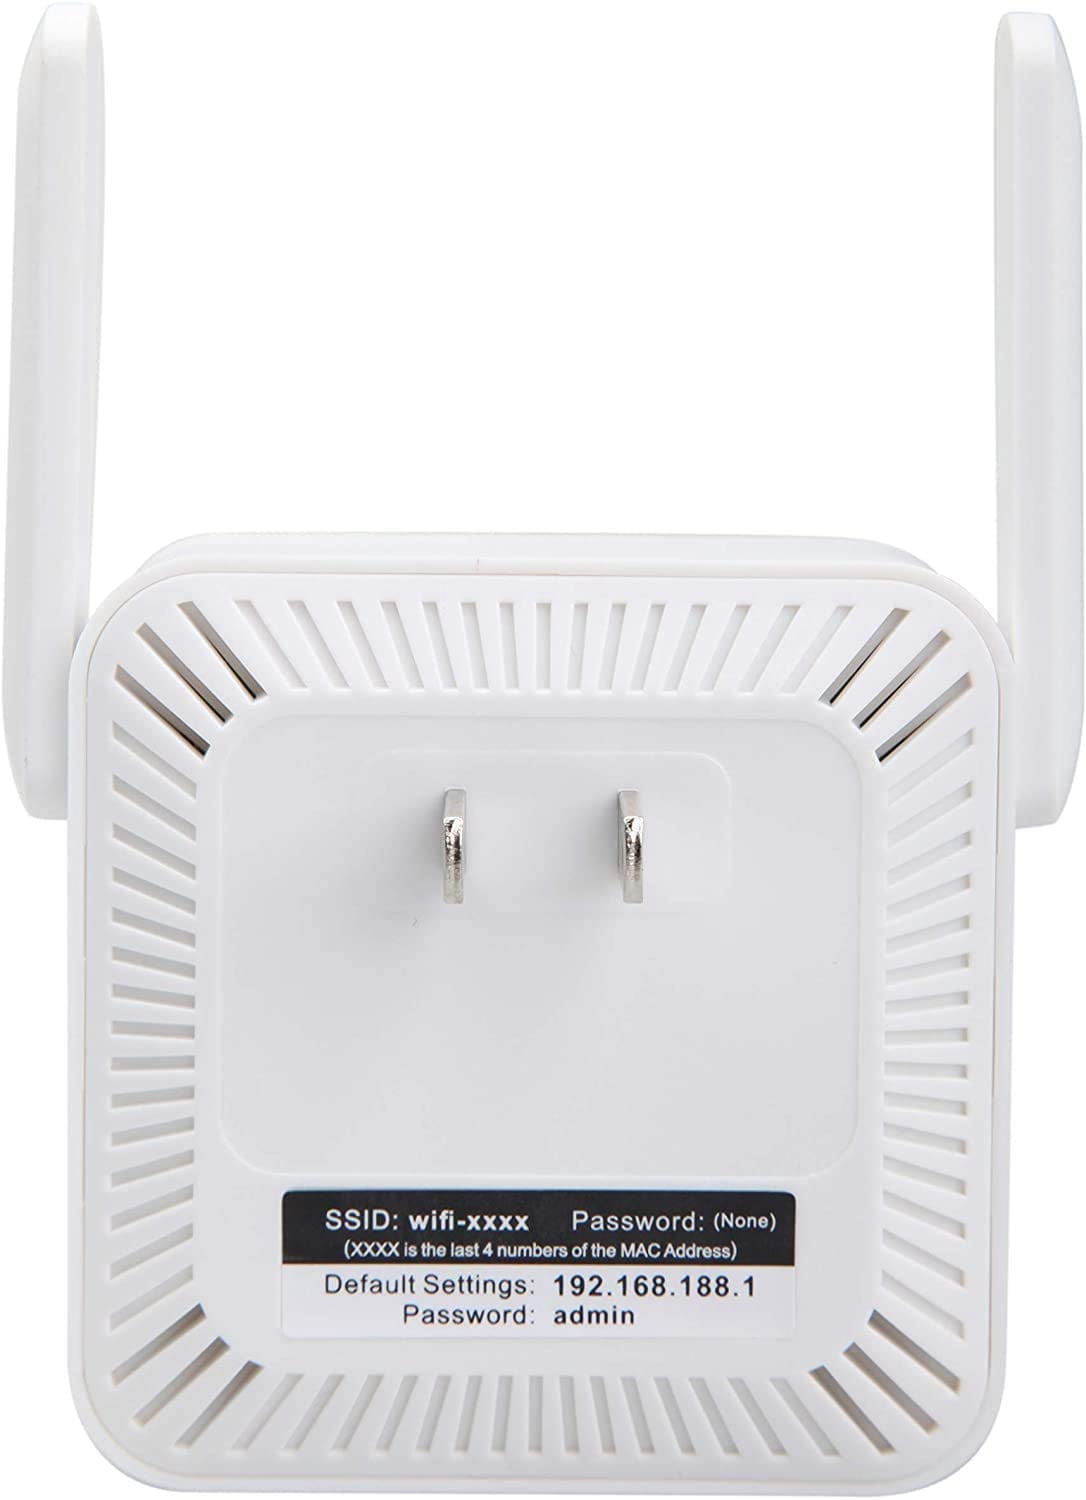 Ved lov Rute Grundlægger Extend Tec, Extend Tecc WiFi Booster, Extendtecc WiFi Booster 2022, WiFi  Range Extender 300Mbps, Wireless Signal Repeater Booster 2.4 and 5GHz Dual  Band 4 Antennas 360° Full Coverage - Walmart.com